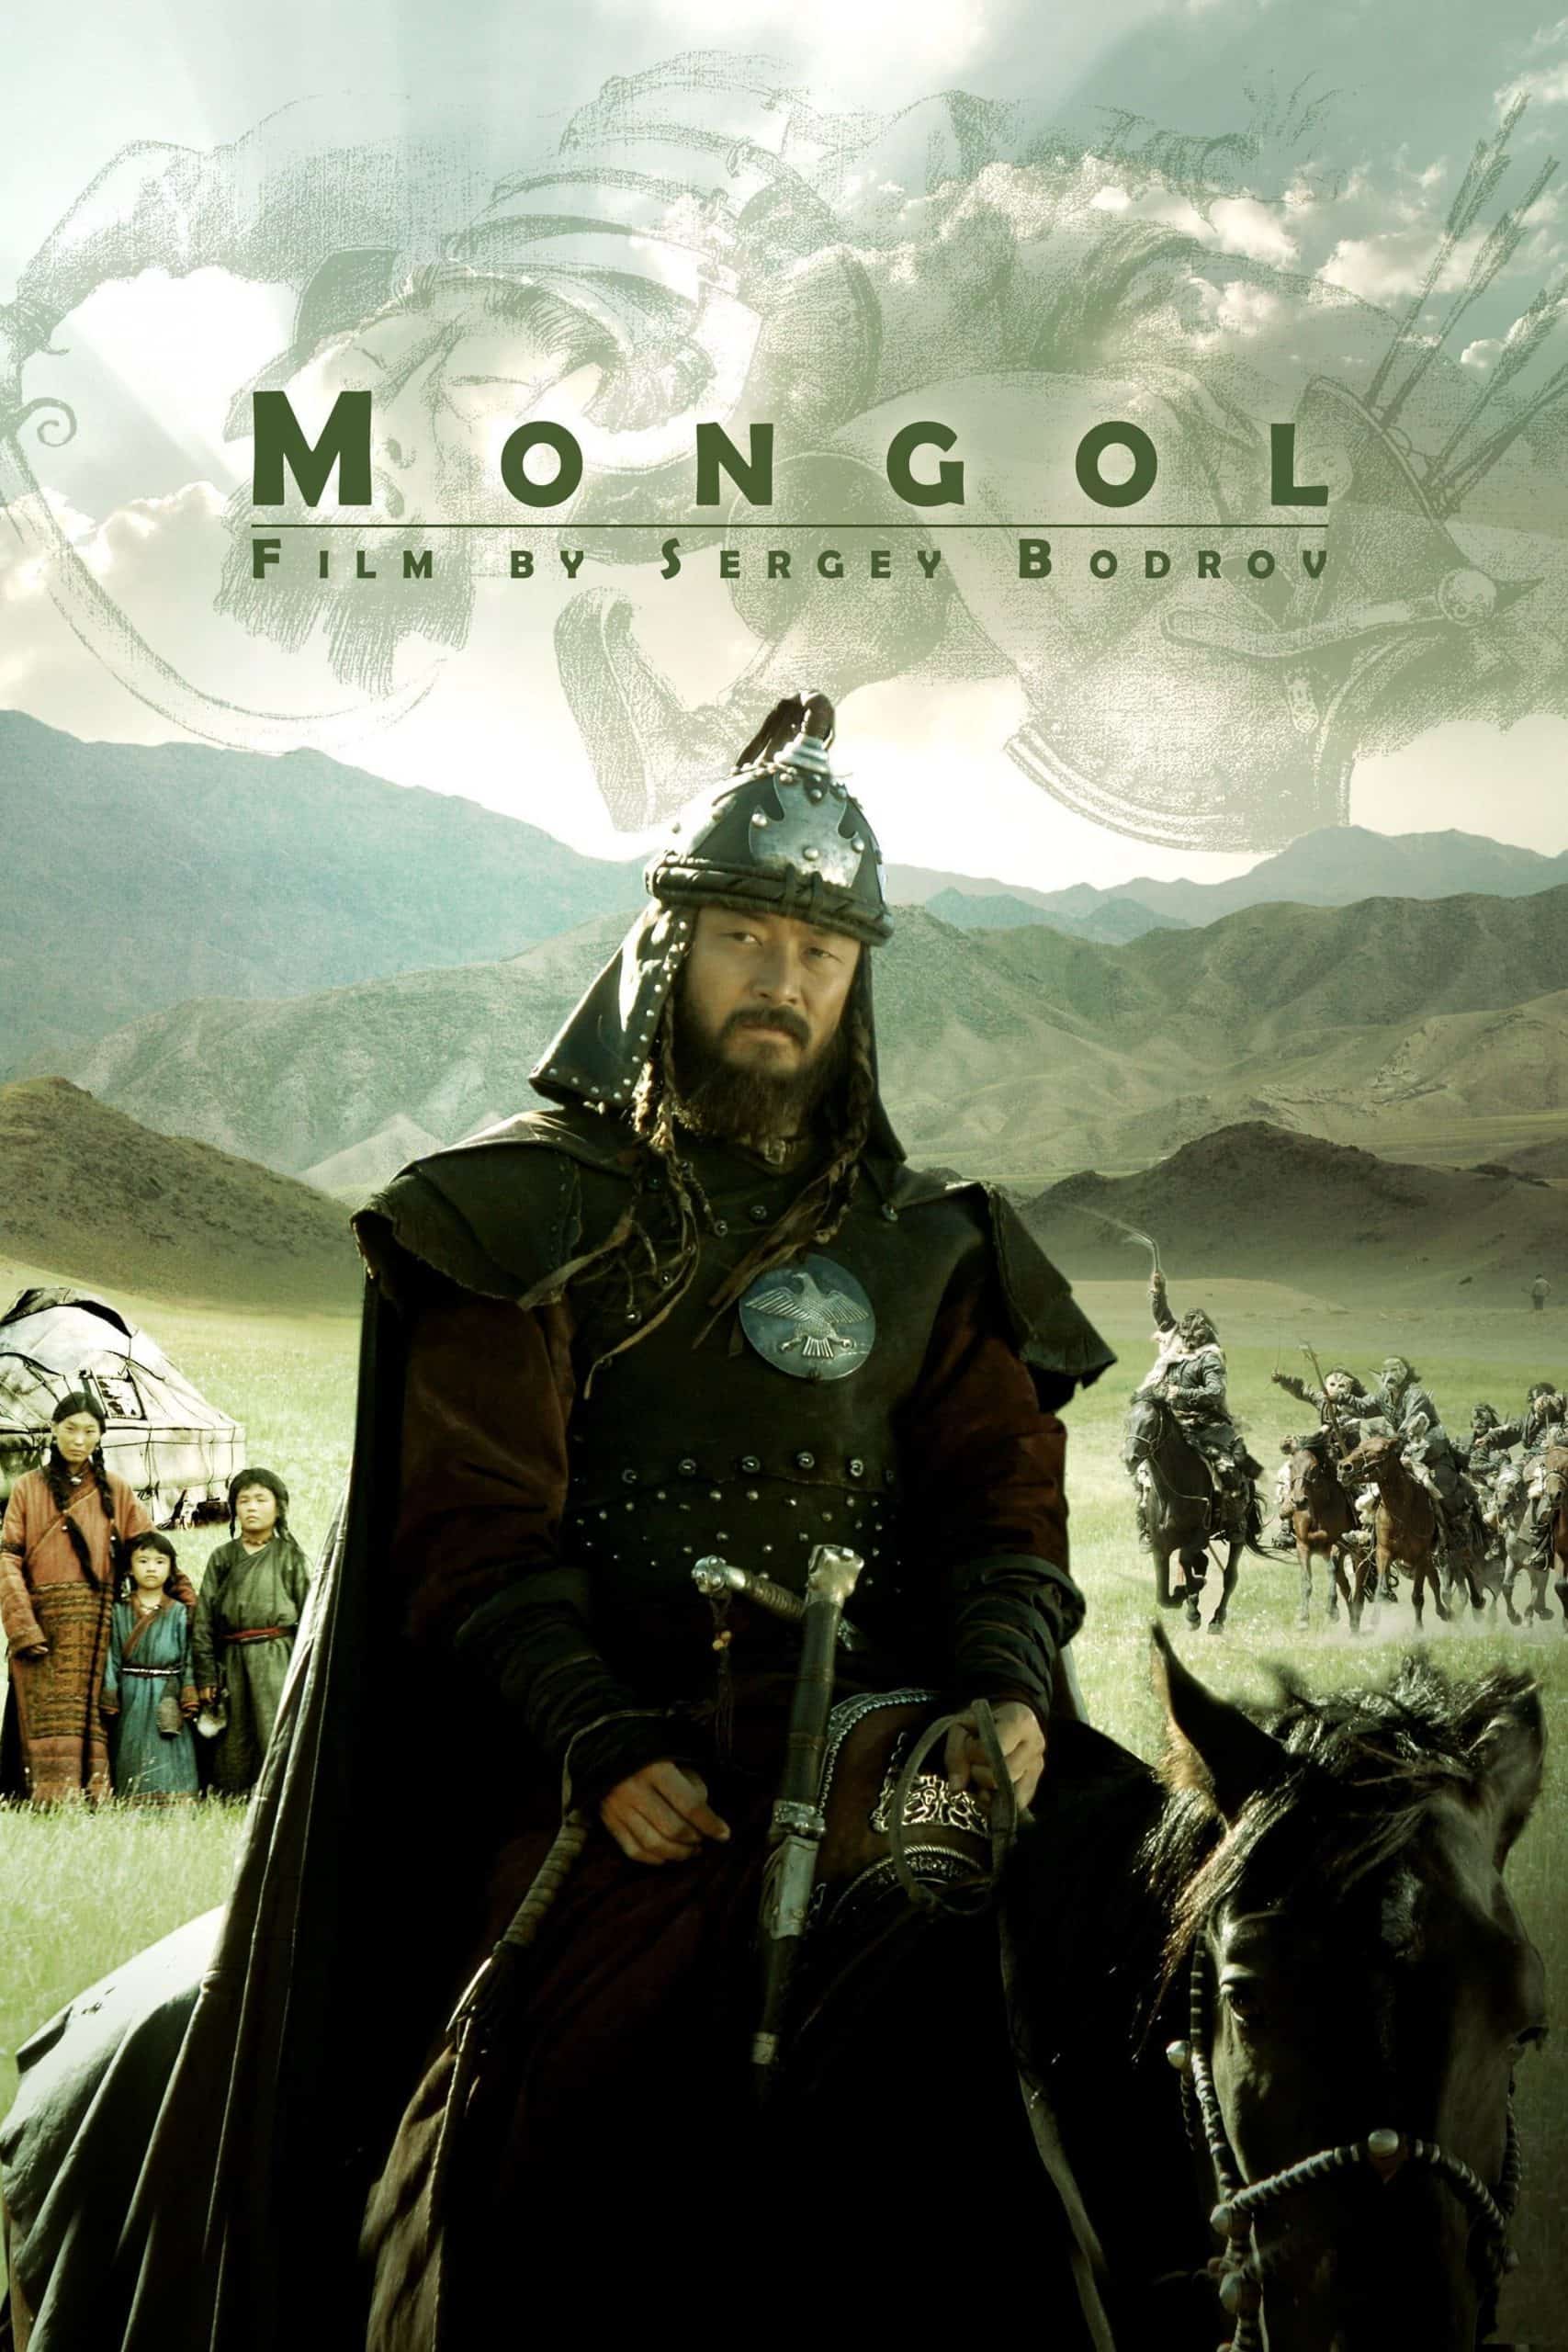 Mongol film about Genghis Khan